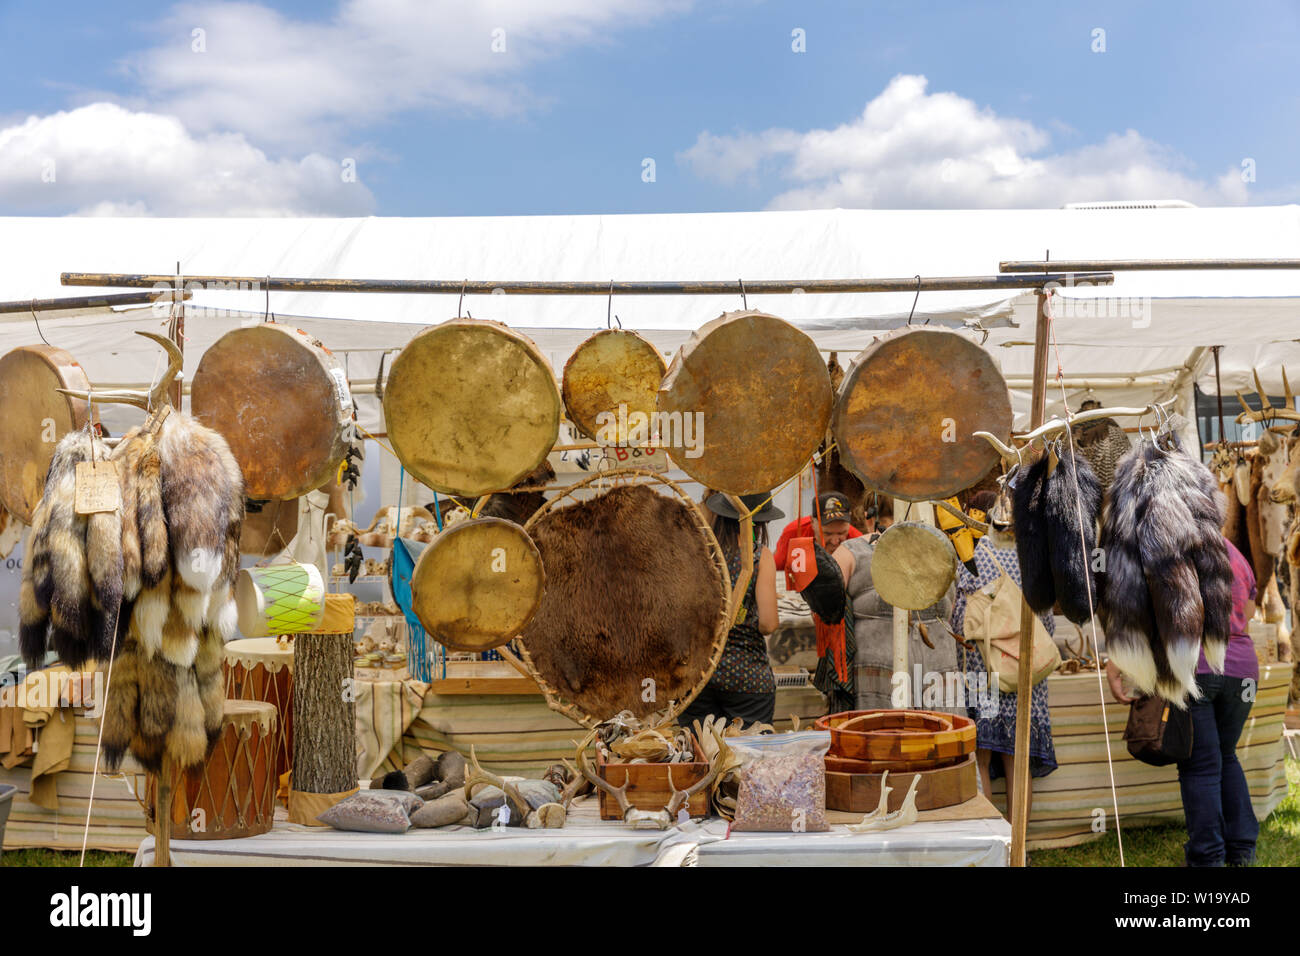 Drums and pelts for sale, Iroquois Festival, Fonda, New York State, USA Stock Photo